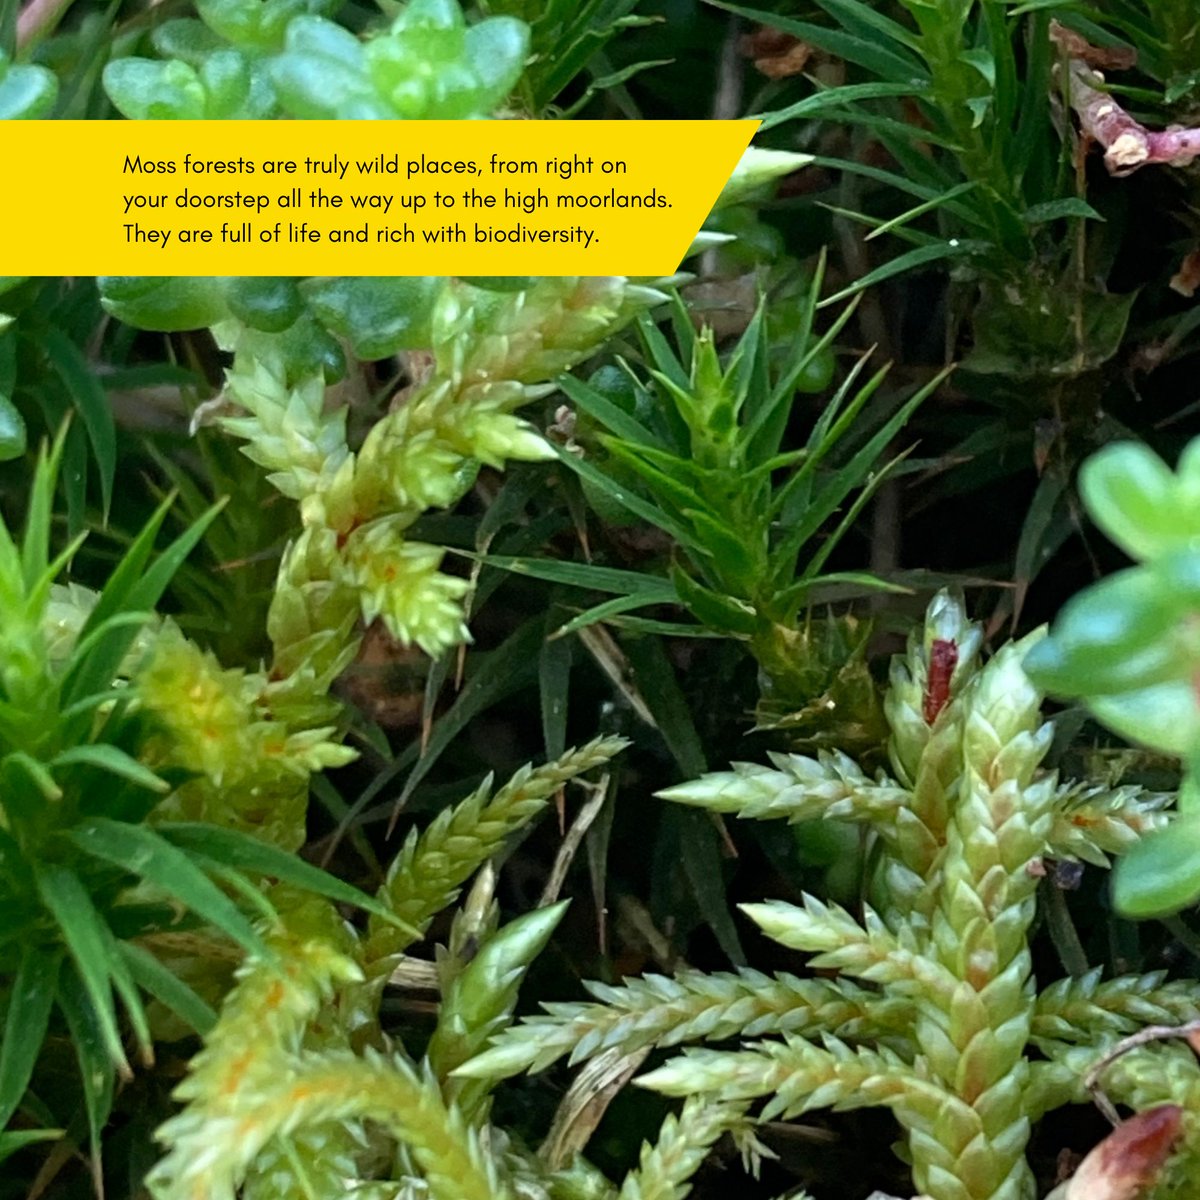 Regeneration of #mossy landscapes on #Dartmoor A chance to hear more about the roles of these small and often unnoticed plants – as pioneers, as preservers of history and in our changing environment. Mon 11 Dec 6.30-7.30pm via Zoom Reserve your free place: eventbrite.co.uk/e/770210589607…